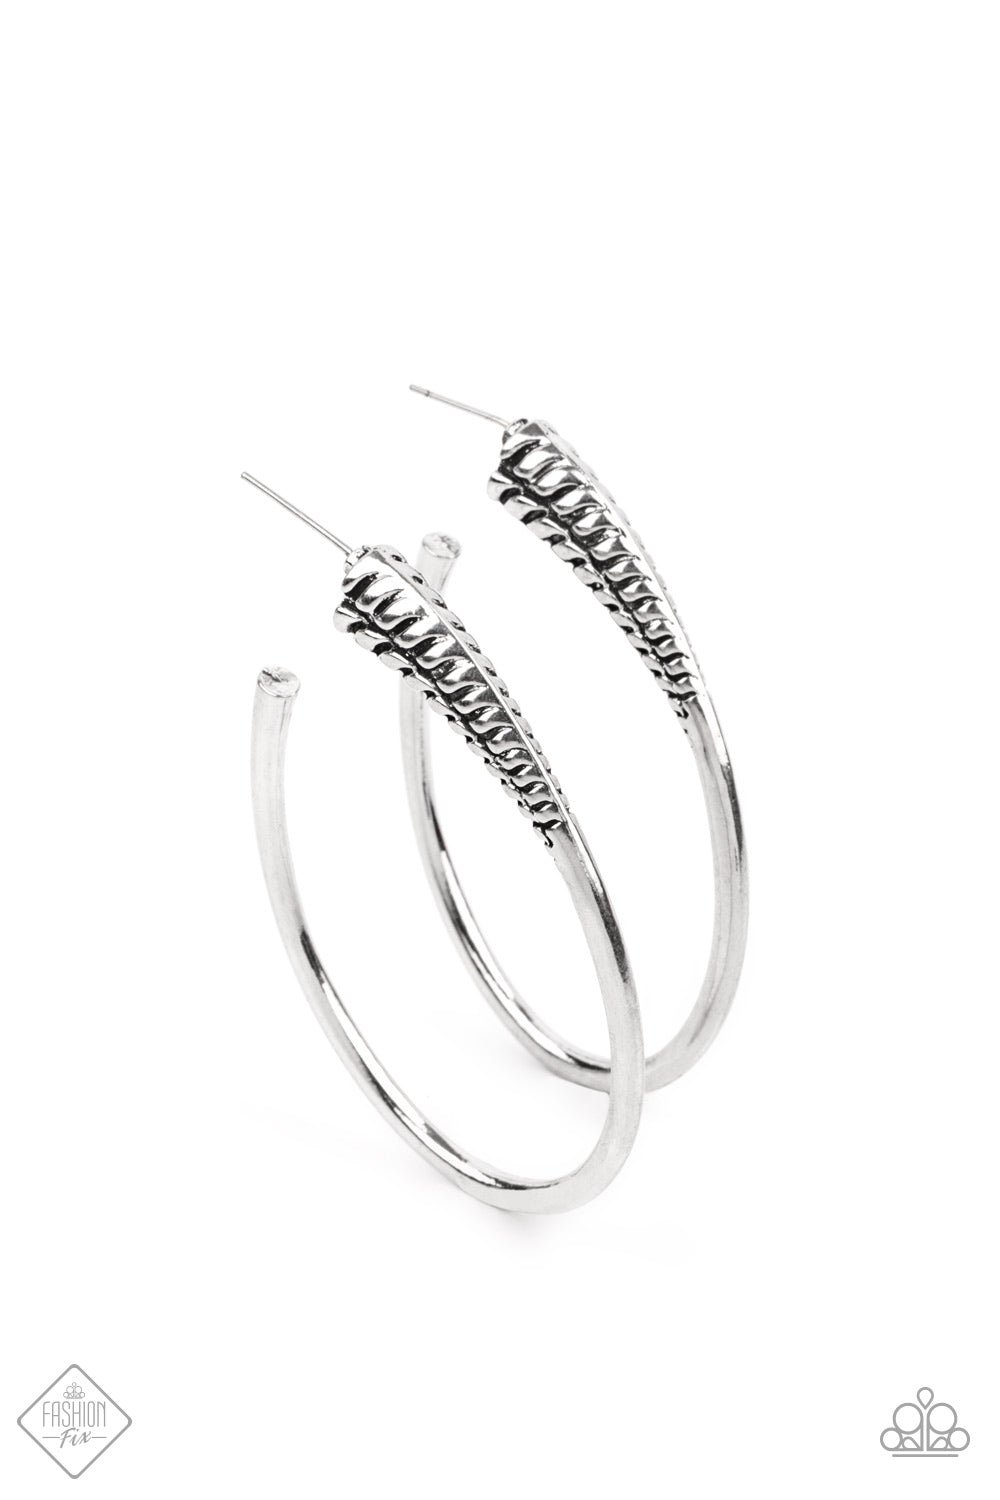 Paparazzi Accessories Fully Loaded - Silver Earrings - Lady T Accessories